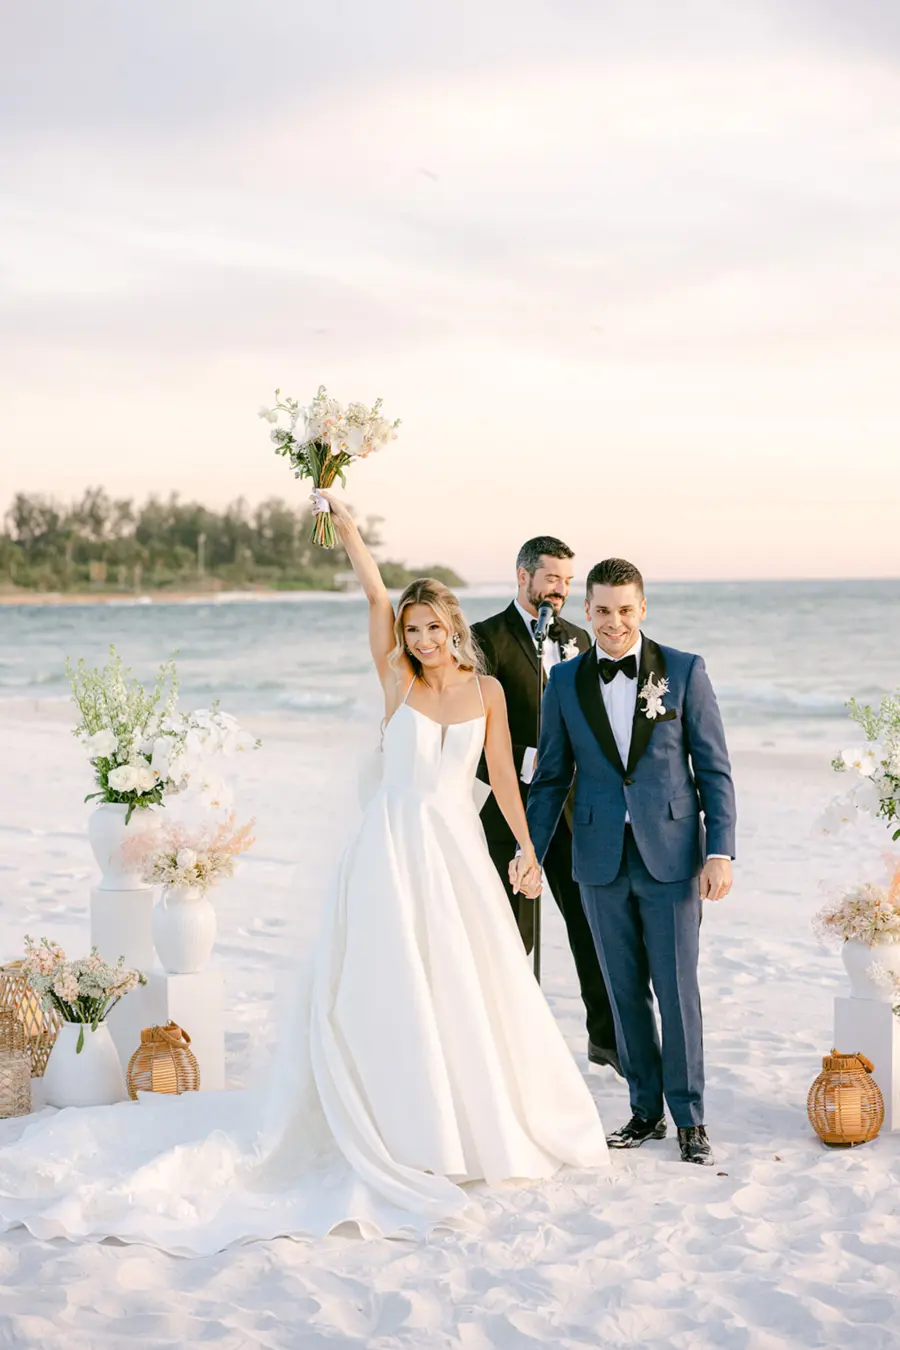 Bride and Groom Just Married Beach Wedding Ceremony Inspiration